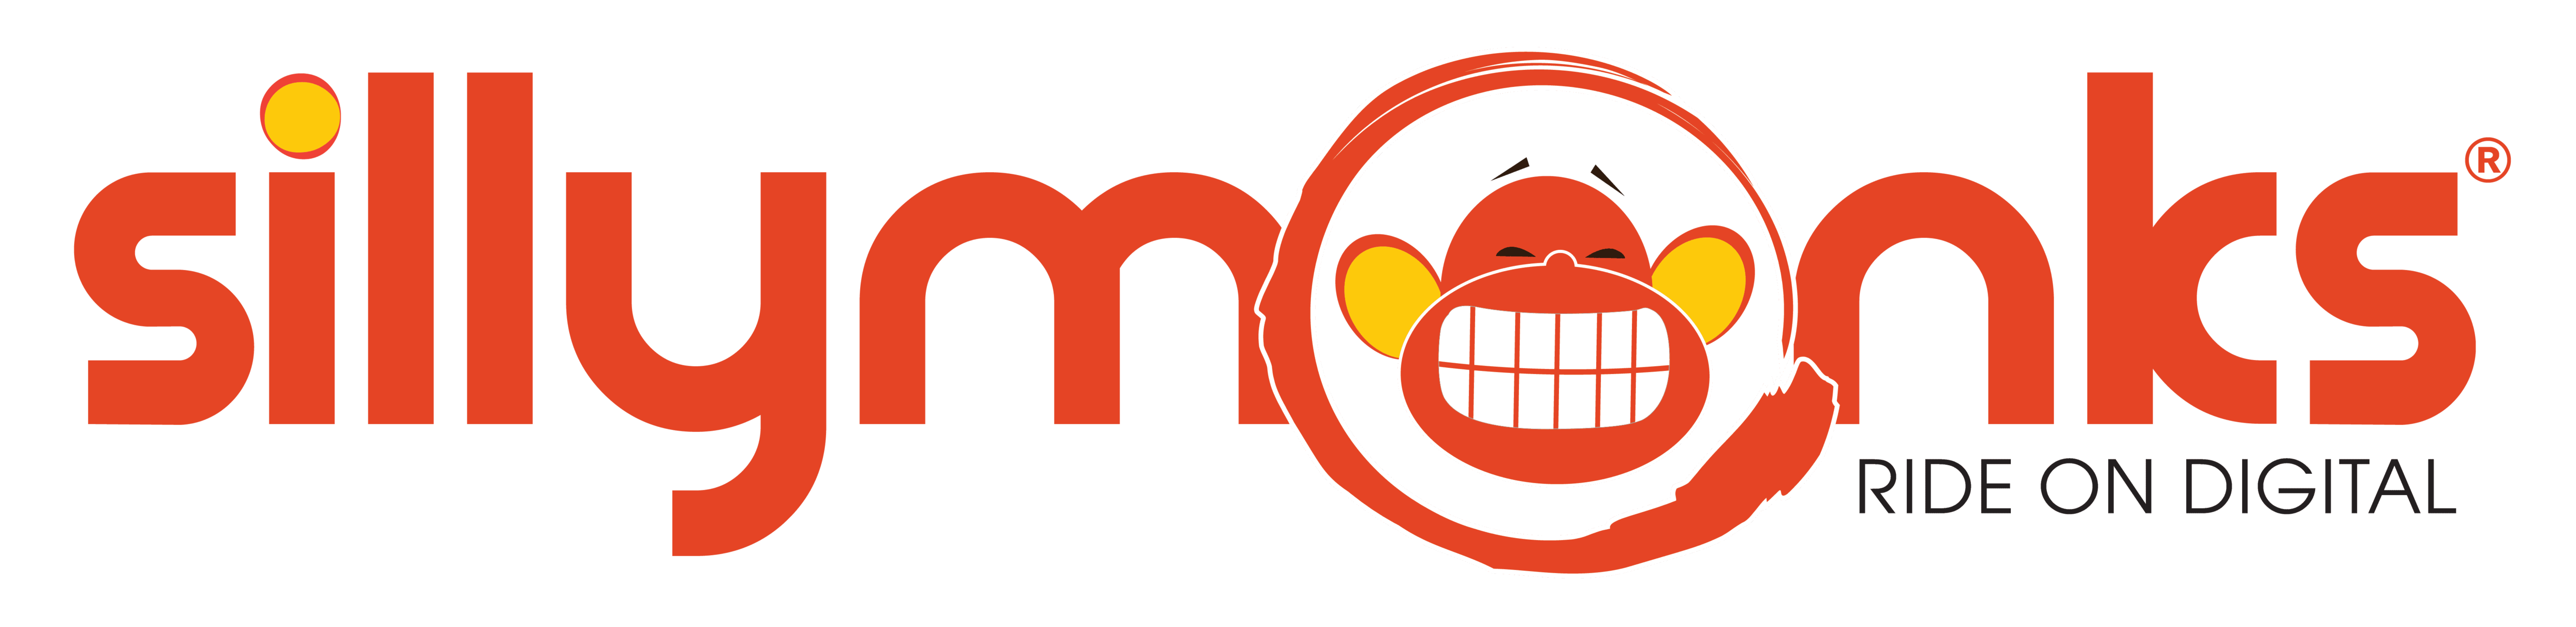 SILLY_MONKS_OFFICIAL_LOGO